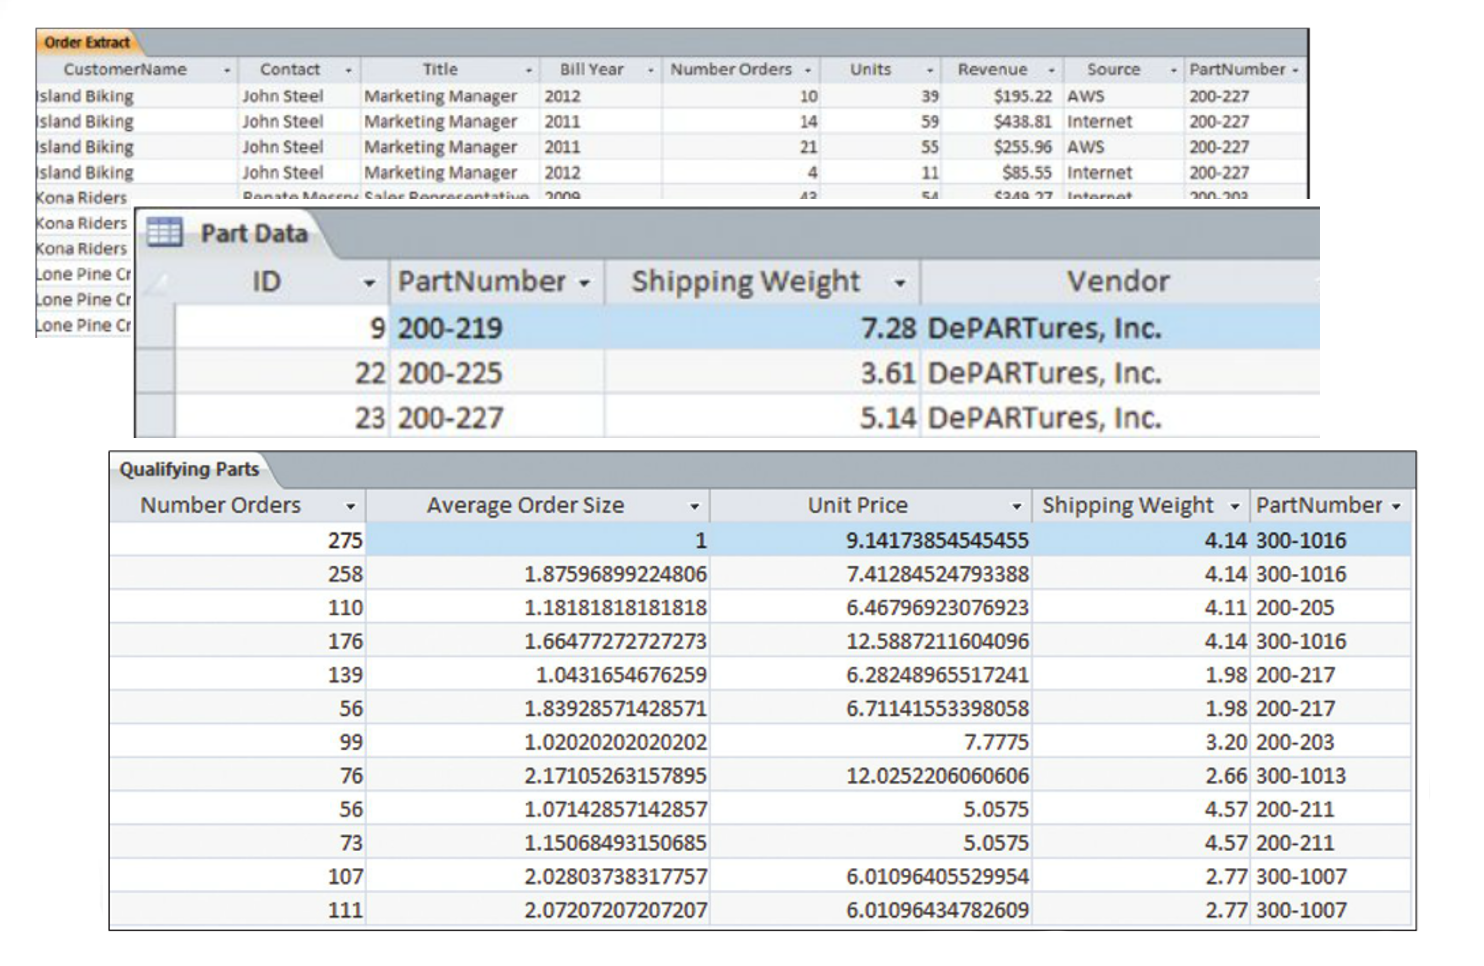 Qualifying parts query with fields: number orders, average order size, unit price, shipping weight, part number